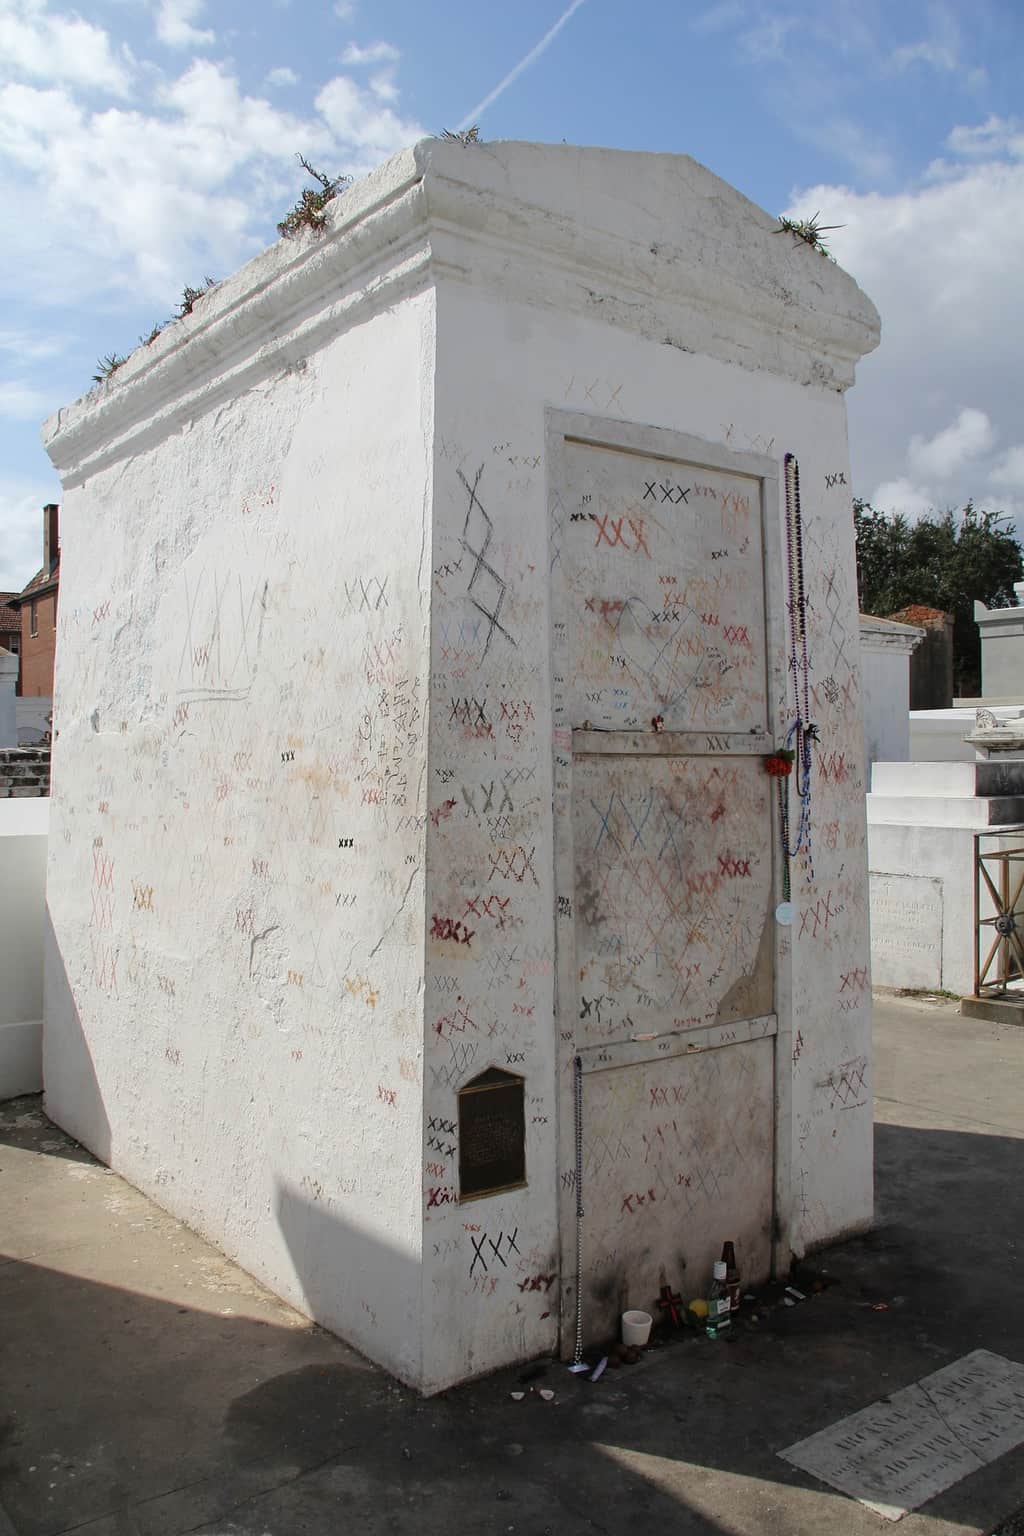 X's are drawn on the tomb of Voodoo Queen Marie Laveau in St. Louis Cemetery No. 1.